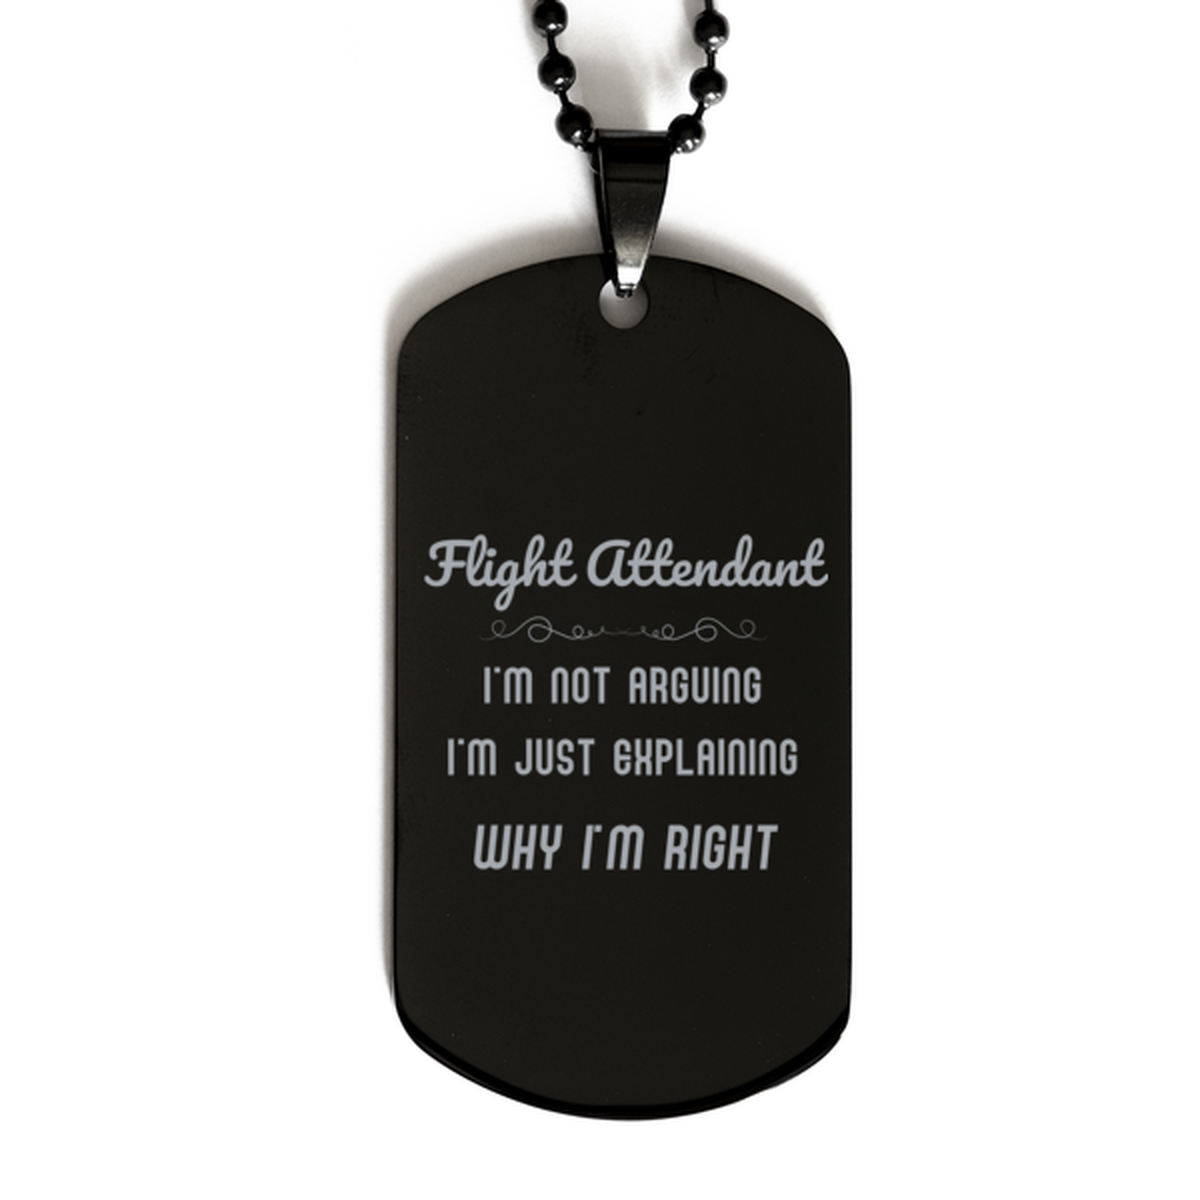 Flight Attendant I'm not Arguing. I'm Just Explaining Why I'm RIGHT Black Dog Tag, Funny Saying Quote Flight Attendant Gifts For Flight Attendant Graduation Birthday Christmas Gifts for Men Women Coworker